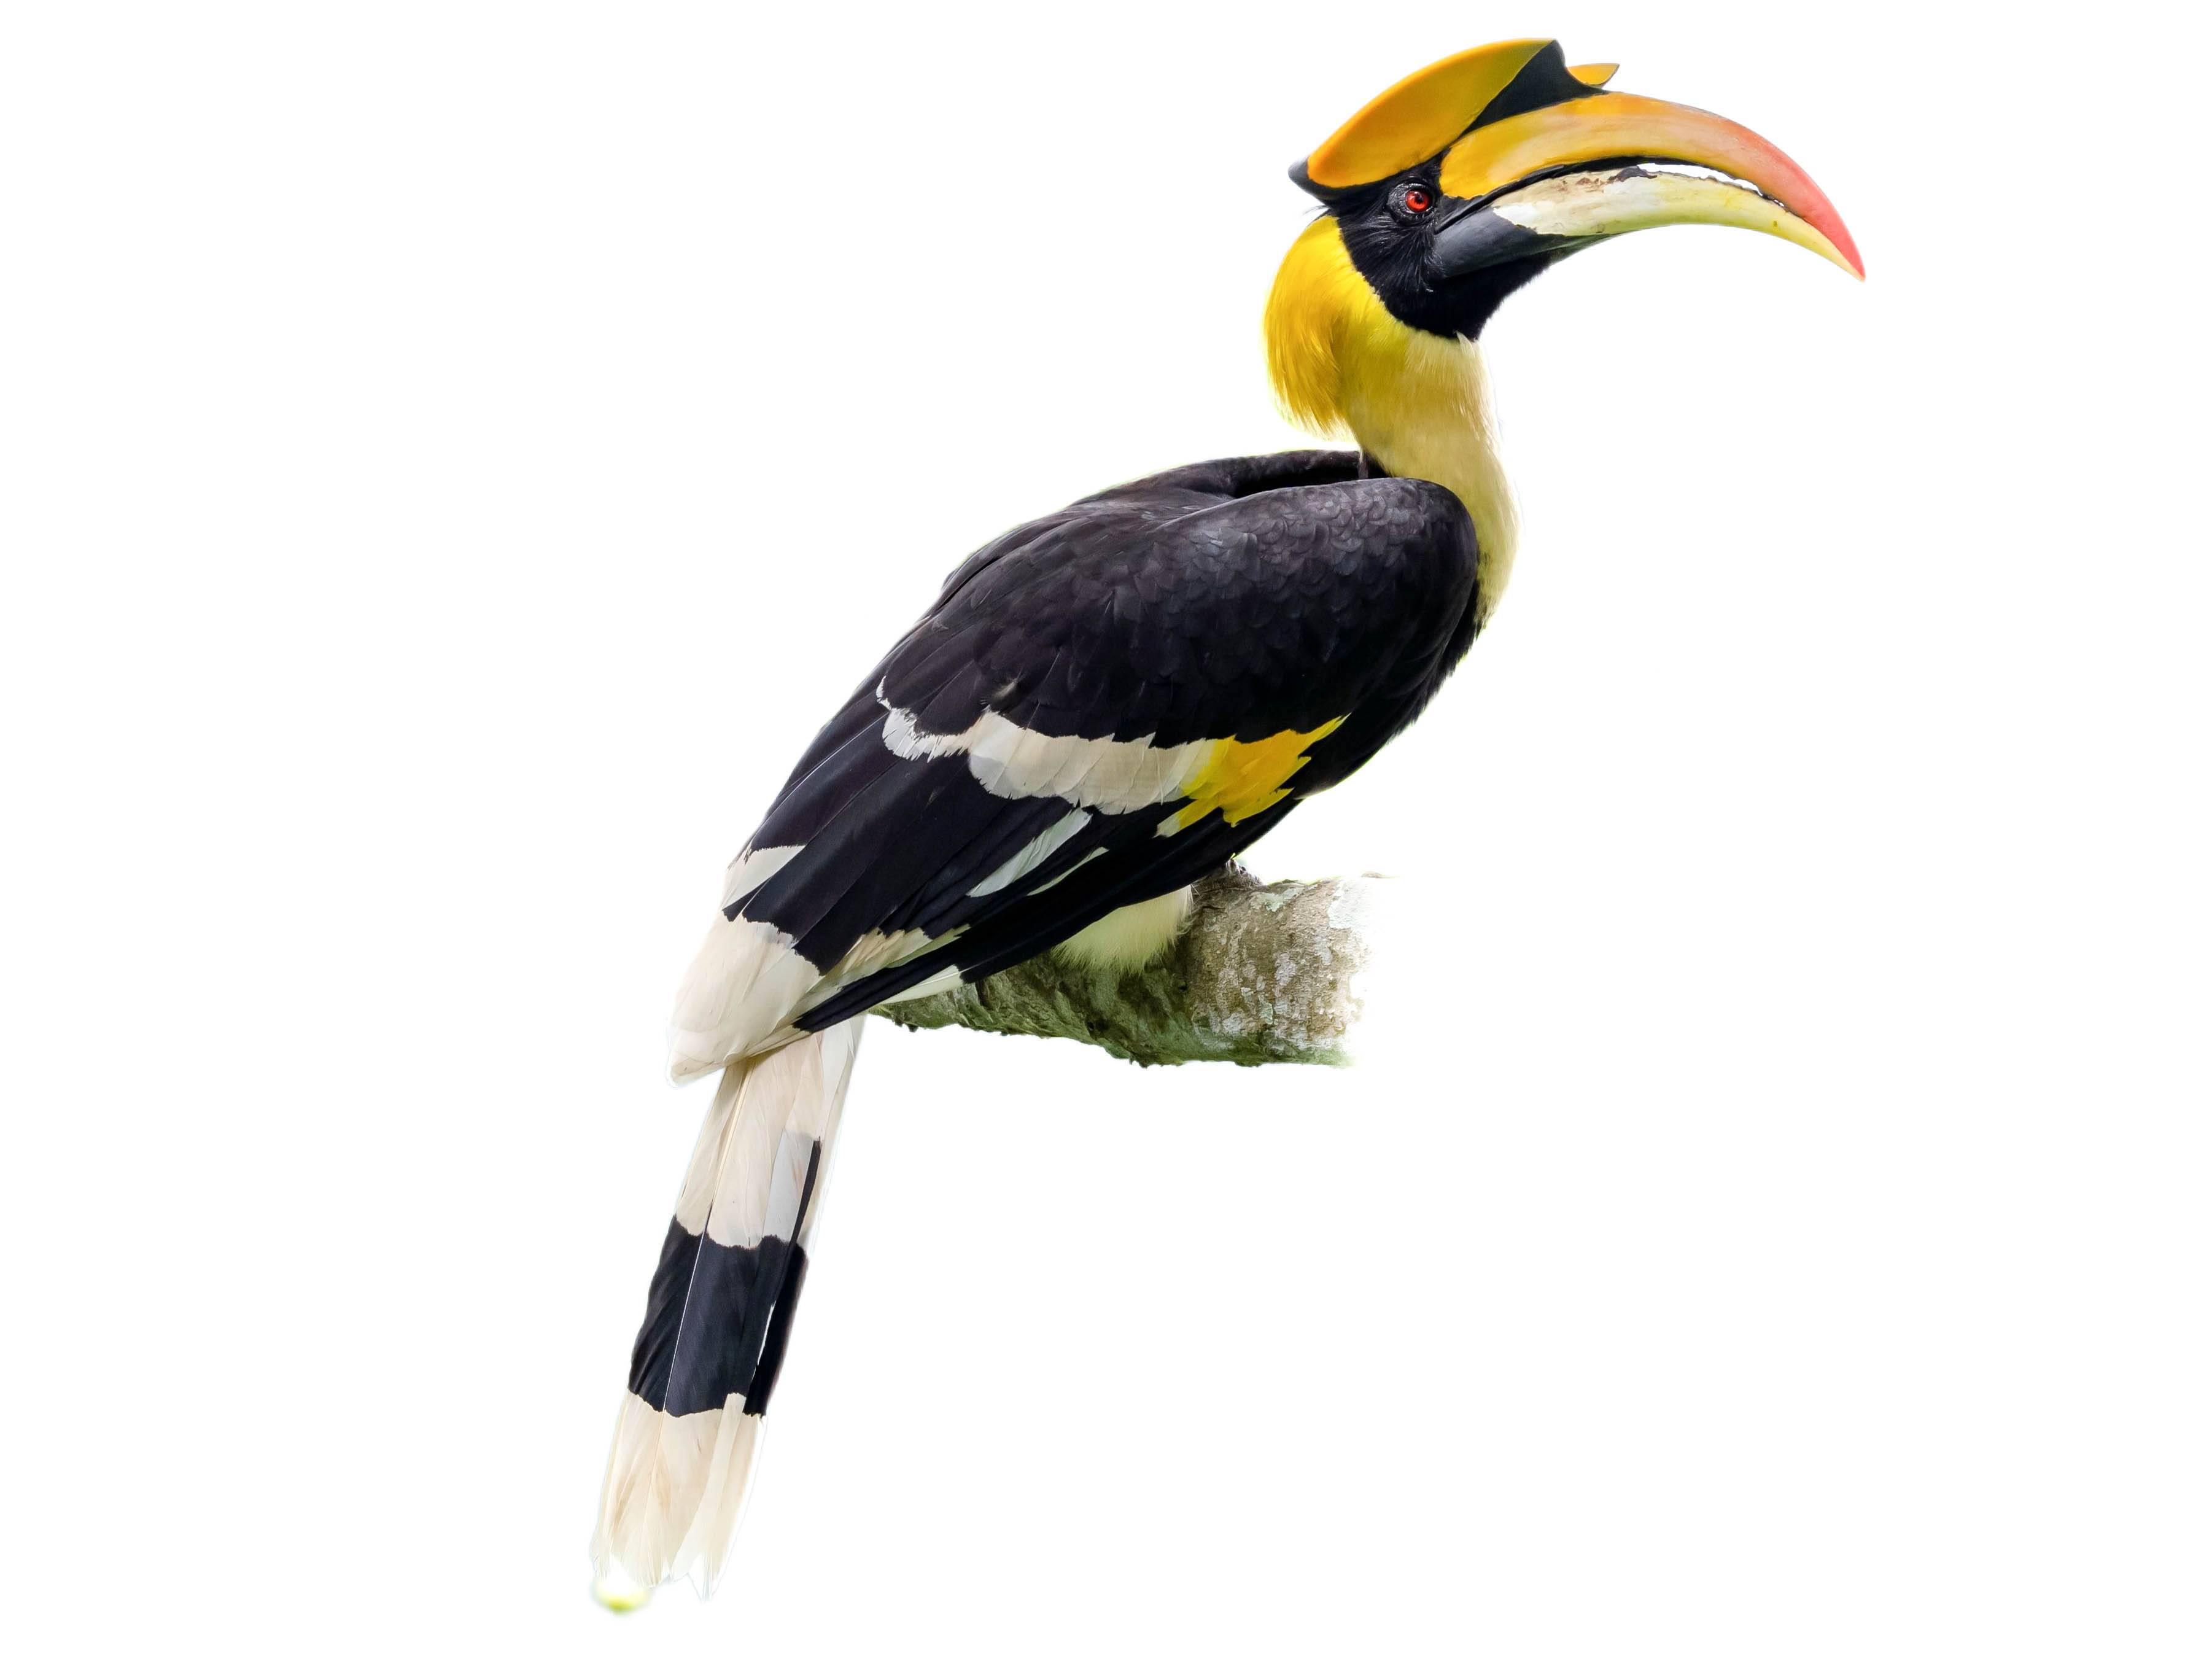 A photo of a Great Hornbill (Buceros bicornis), male